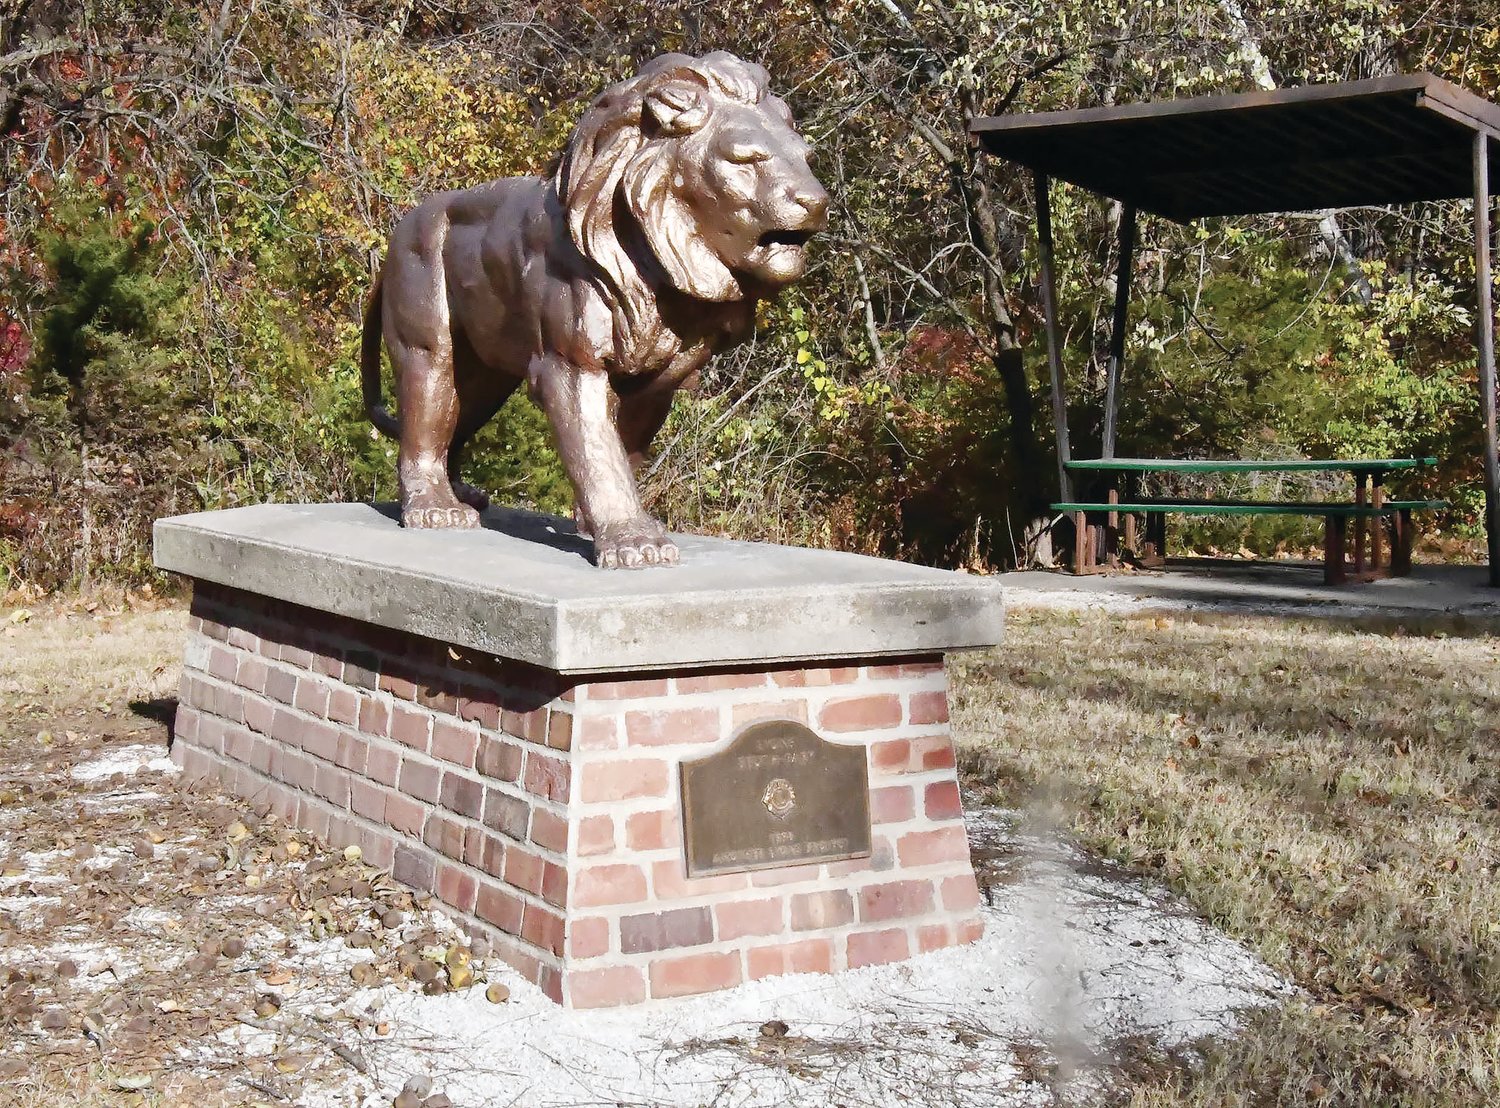 This lions' statue was built at Beuth Lake Park in the late-1990s.